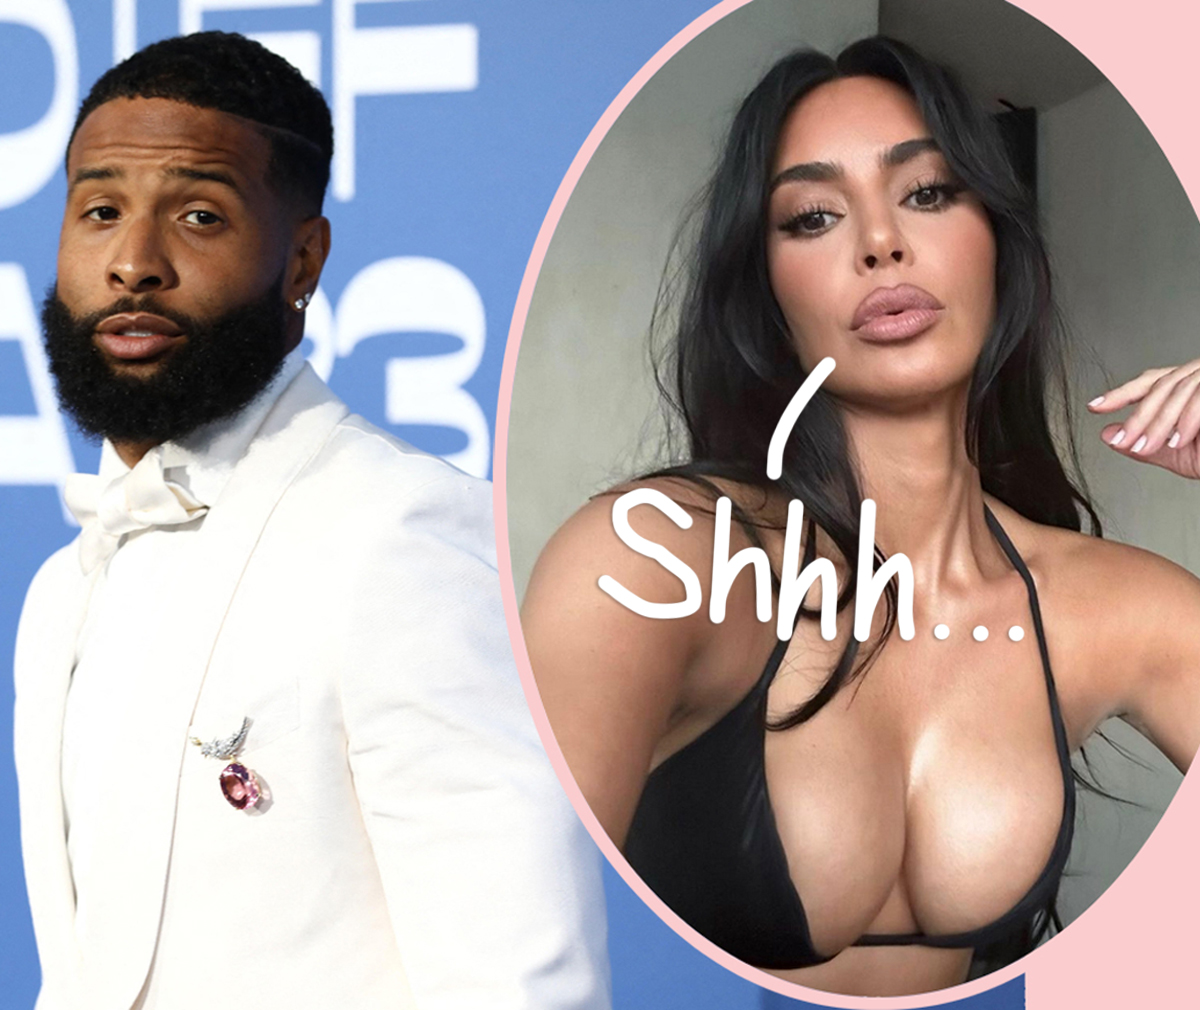 #Kim Kardashian & Odell Beckham Jr. Link Up At Pre-Grammys Bash! …And What’s This About Meeting After In Secret In A Parking Garage??